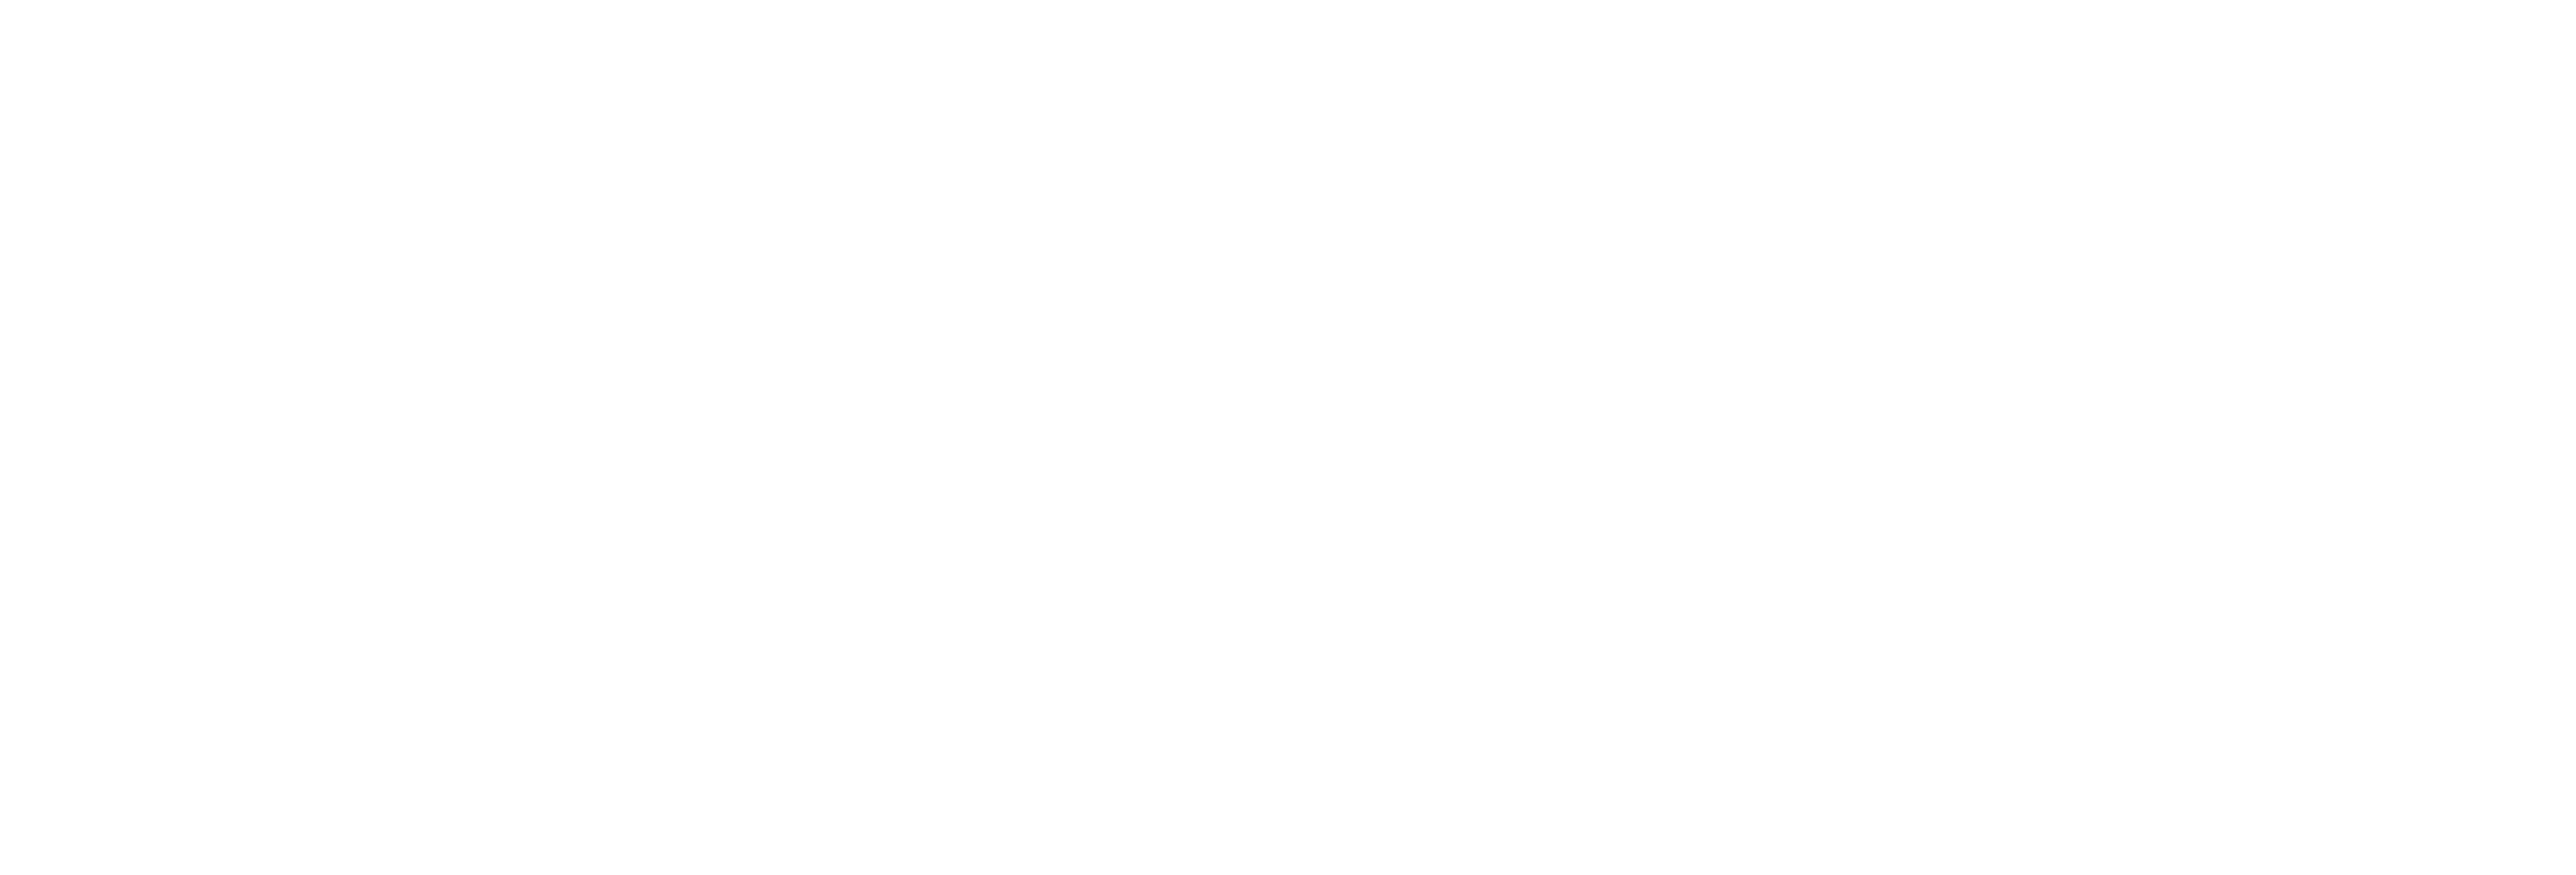 South Indian catering services near me